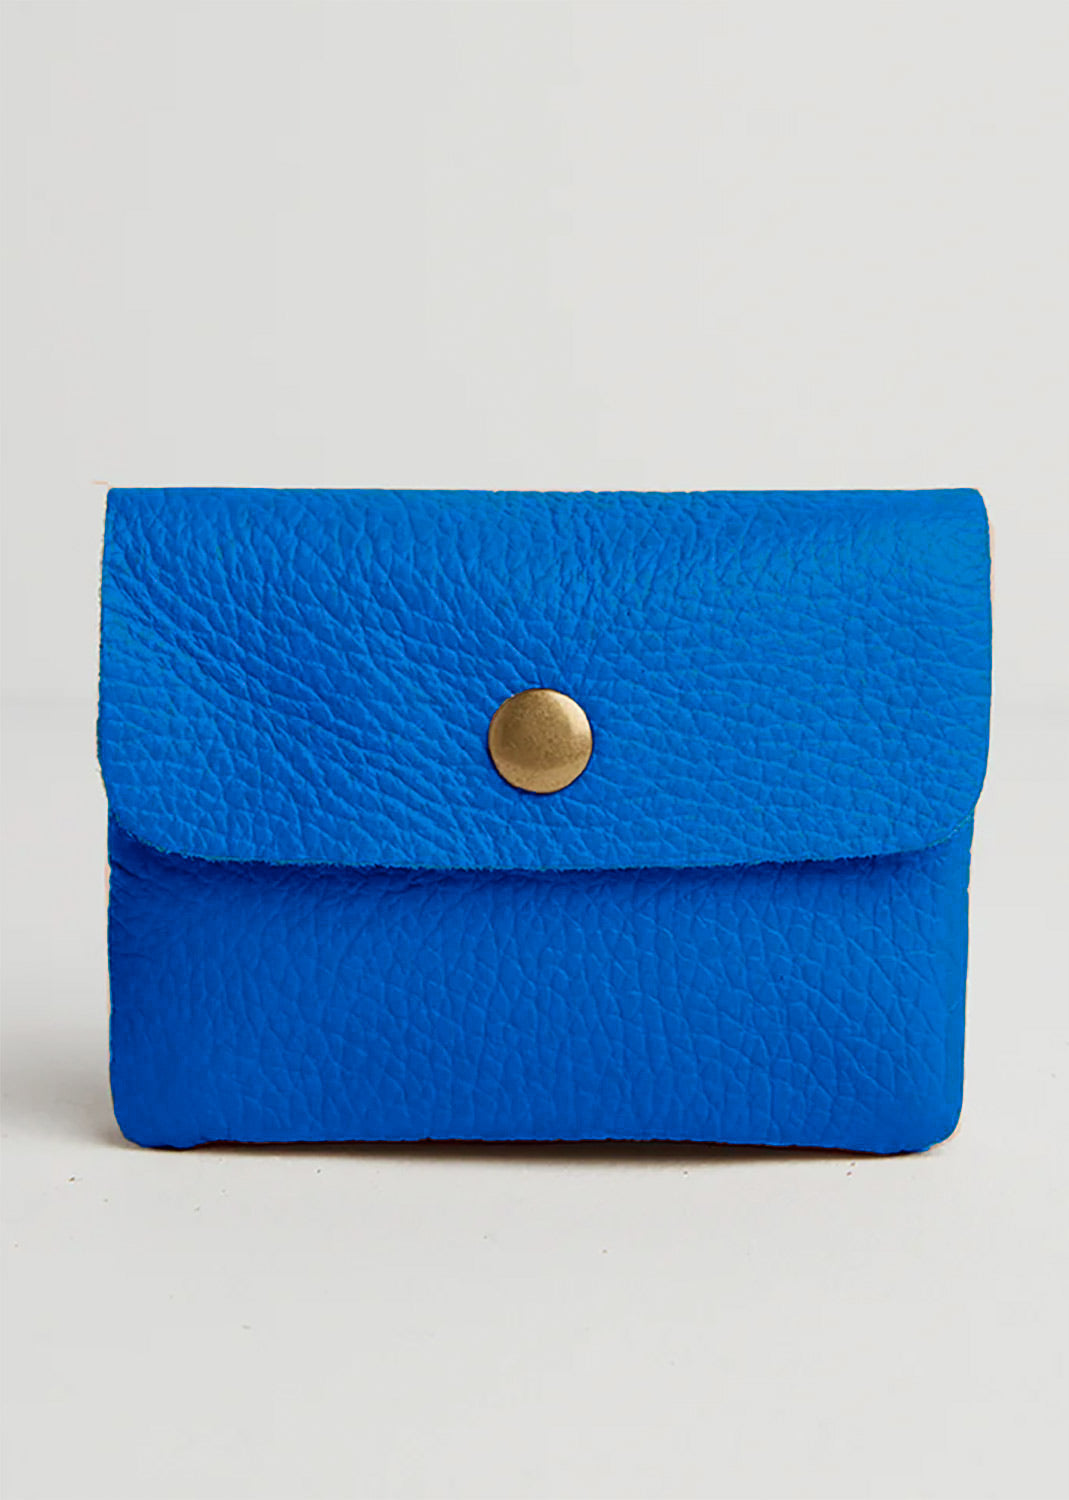 Blue Small Leather Purse